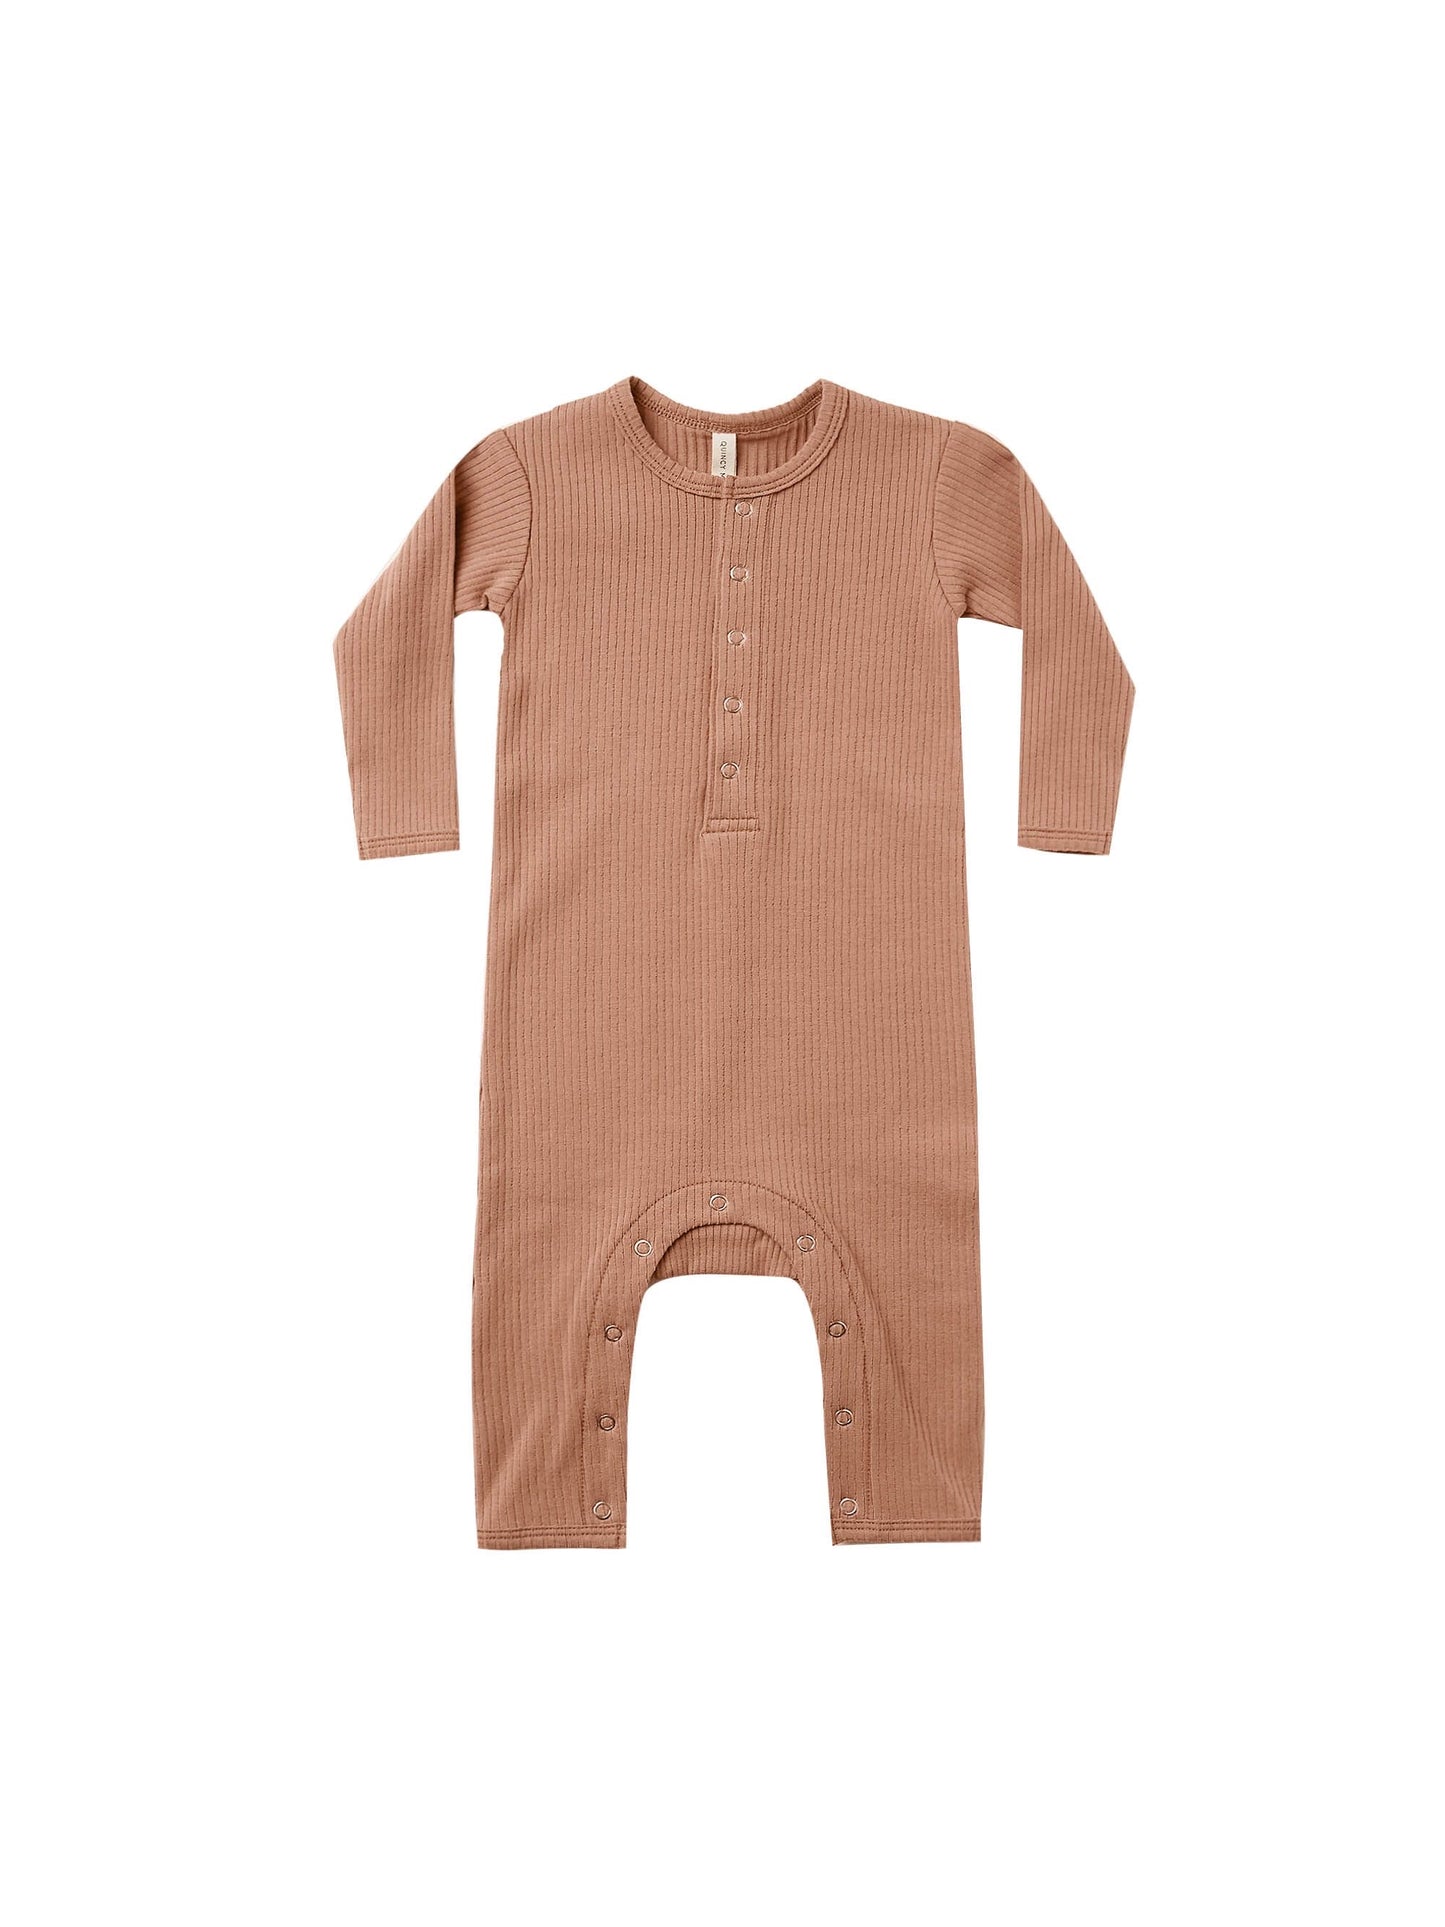 Ribbed baby jumpsuit - Terracotta